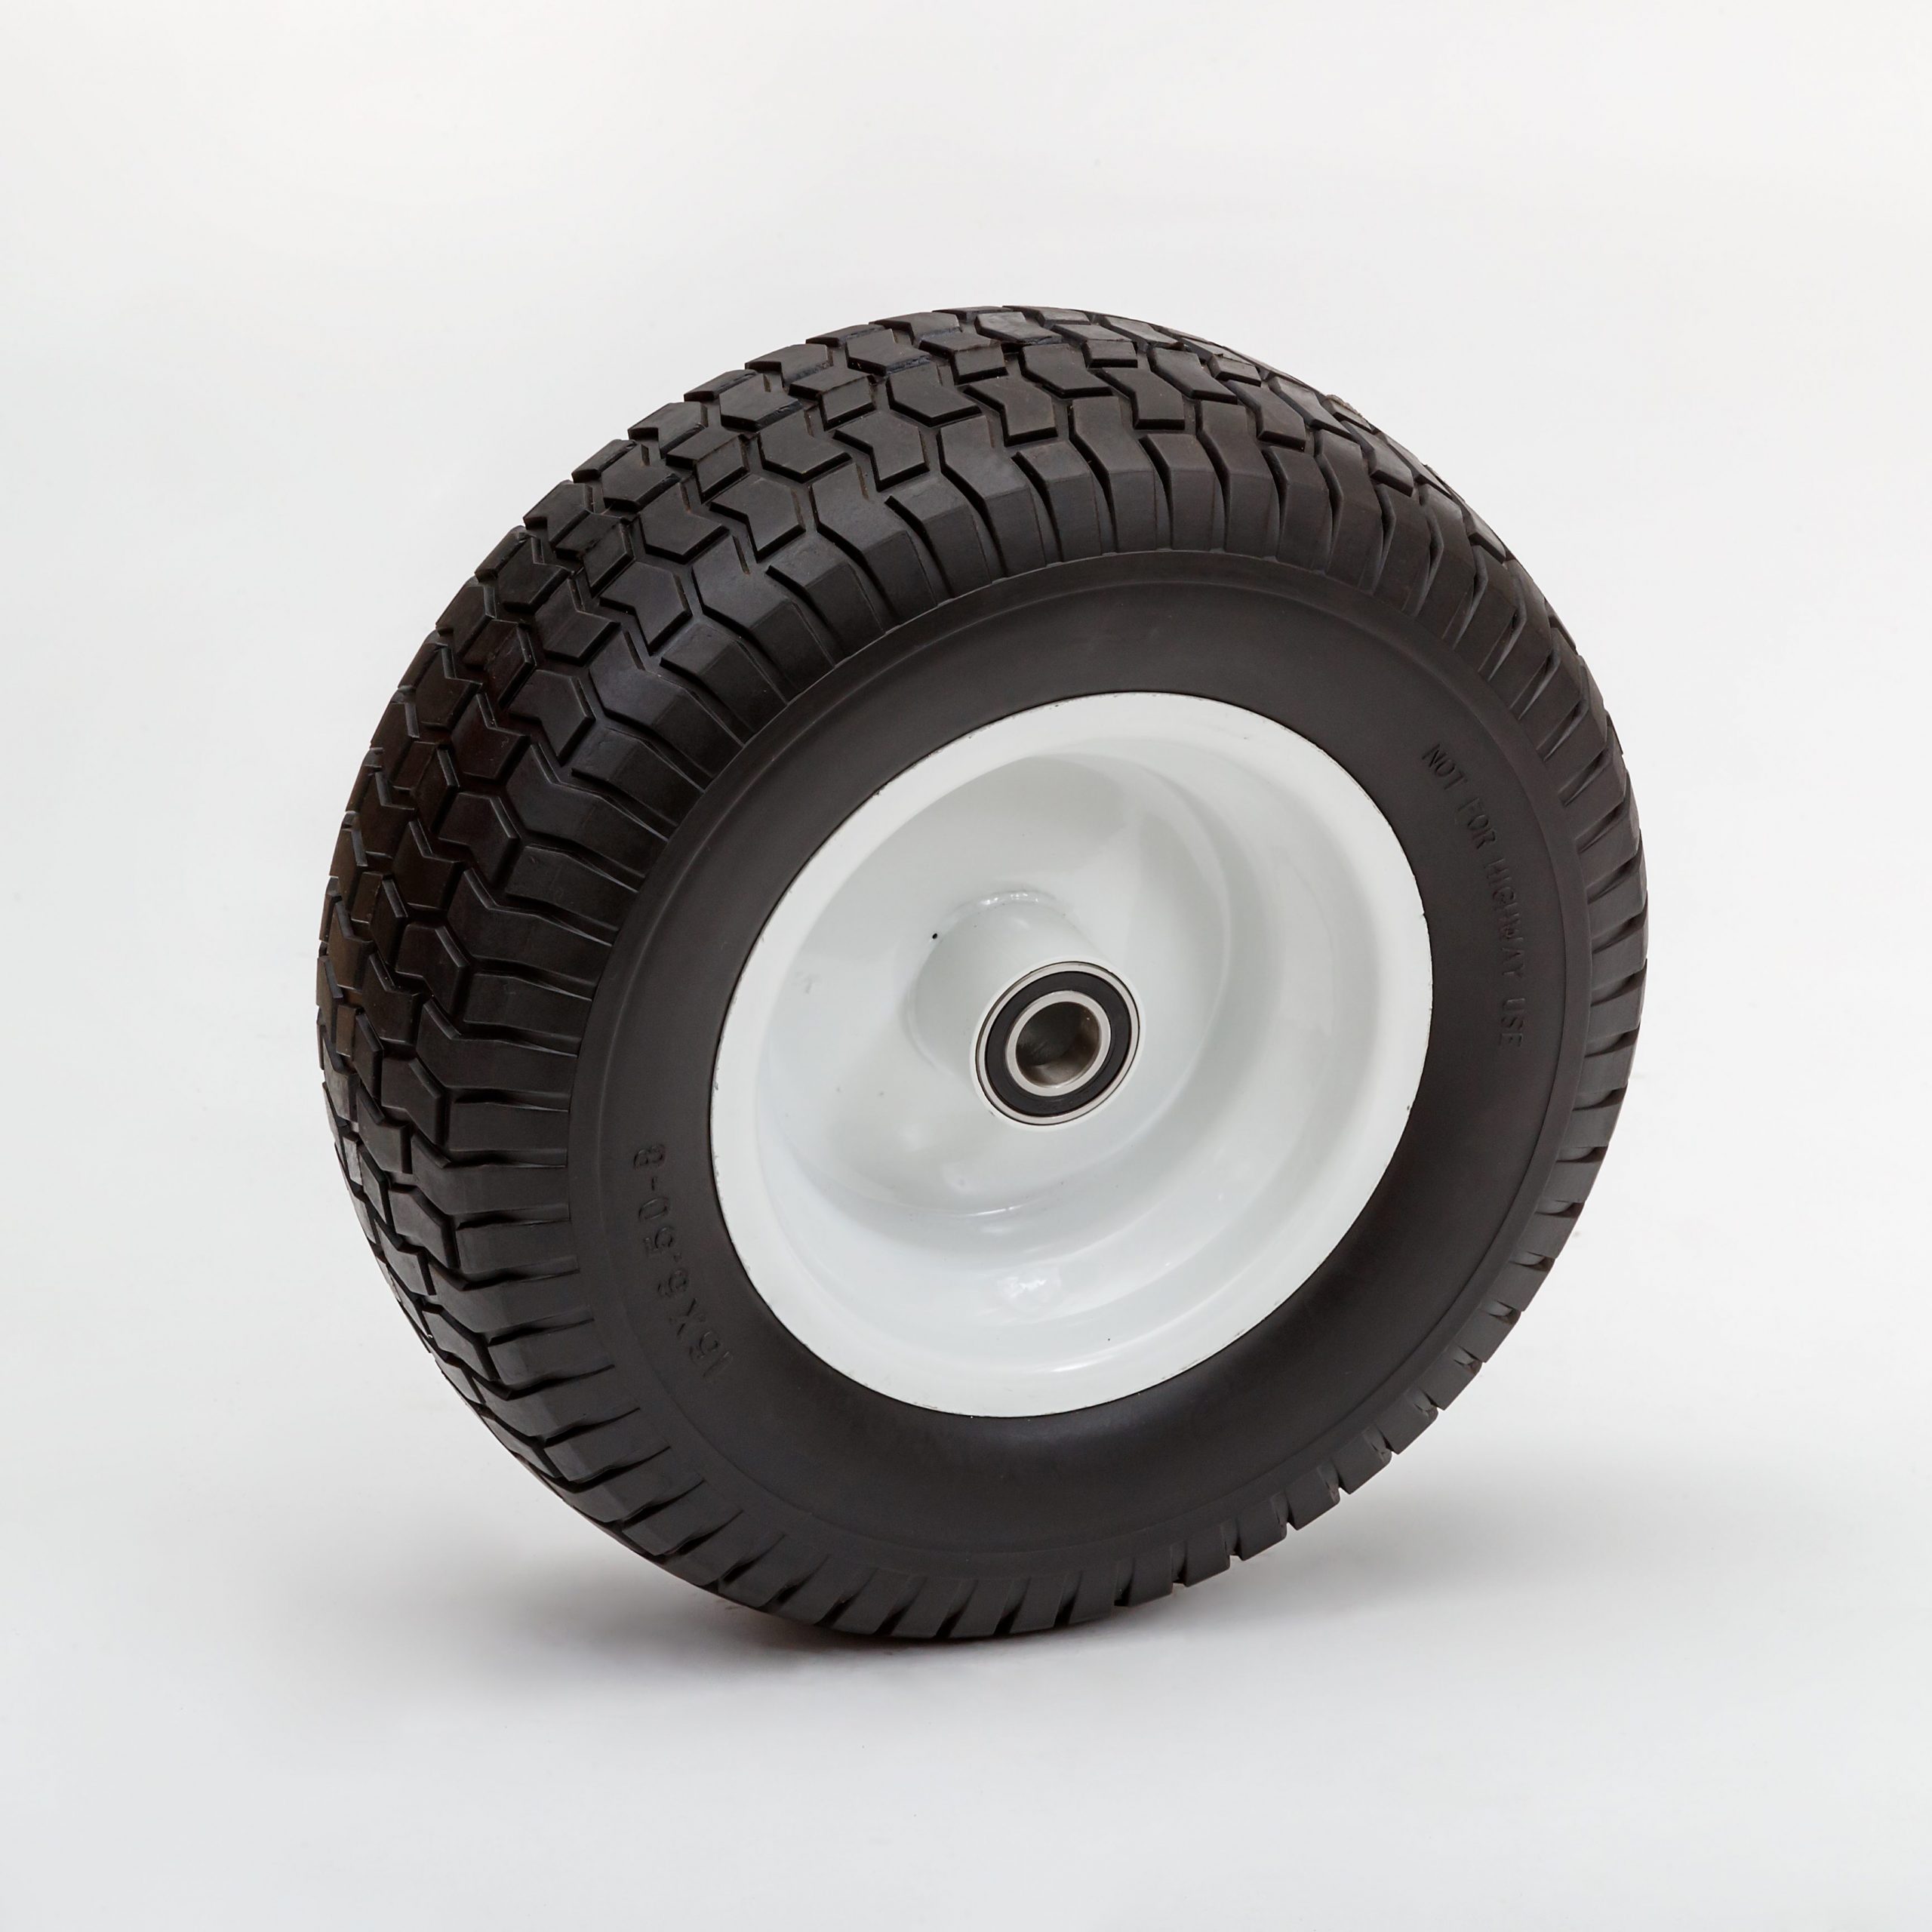 16 6 50 8 tires for wagon